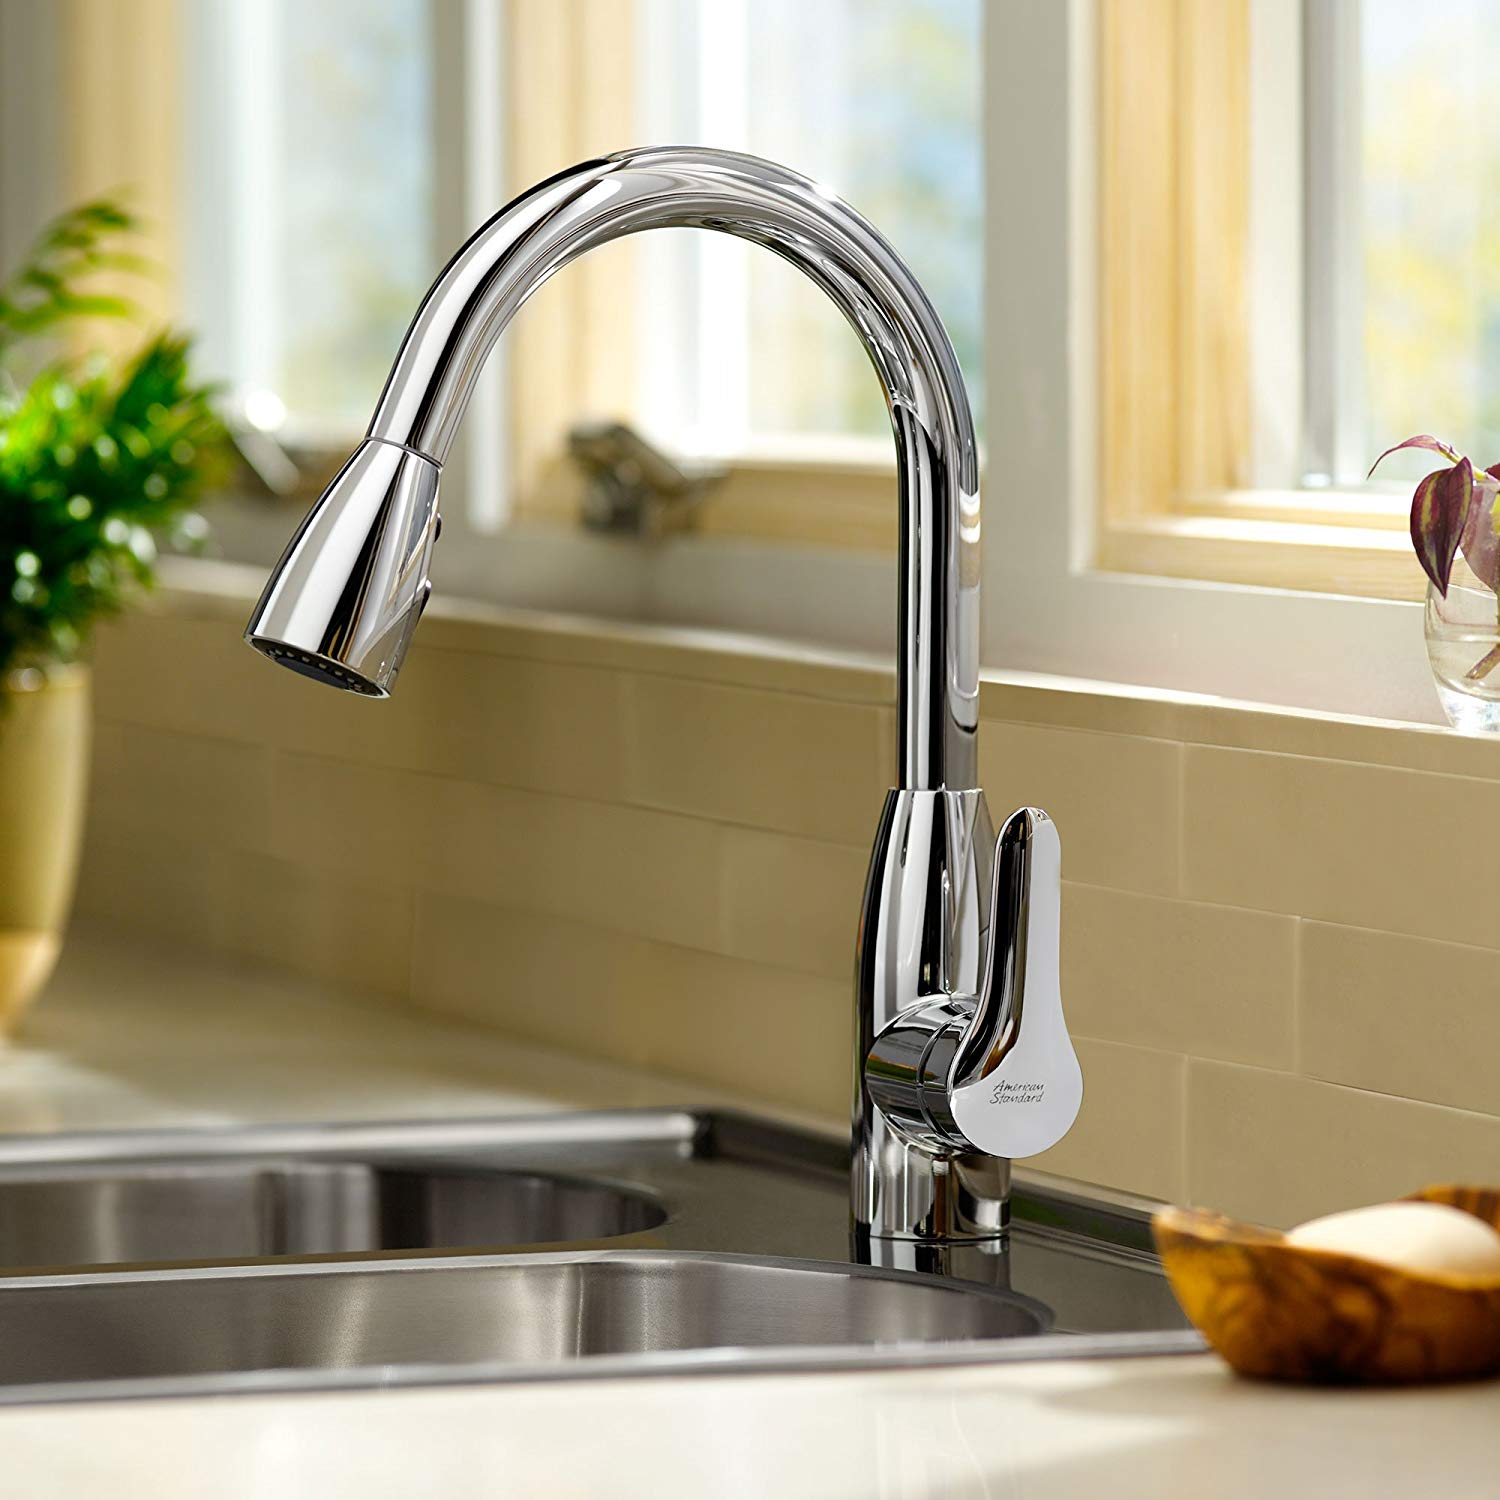 American Standard Soft Pull-Down Kitchen Faucet Only $99.00! (Reg $220)